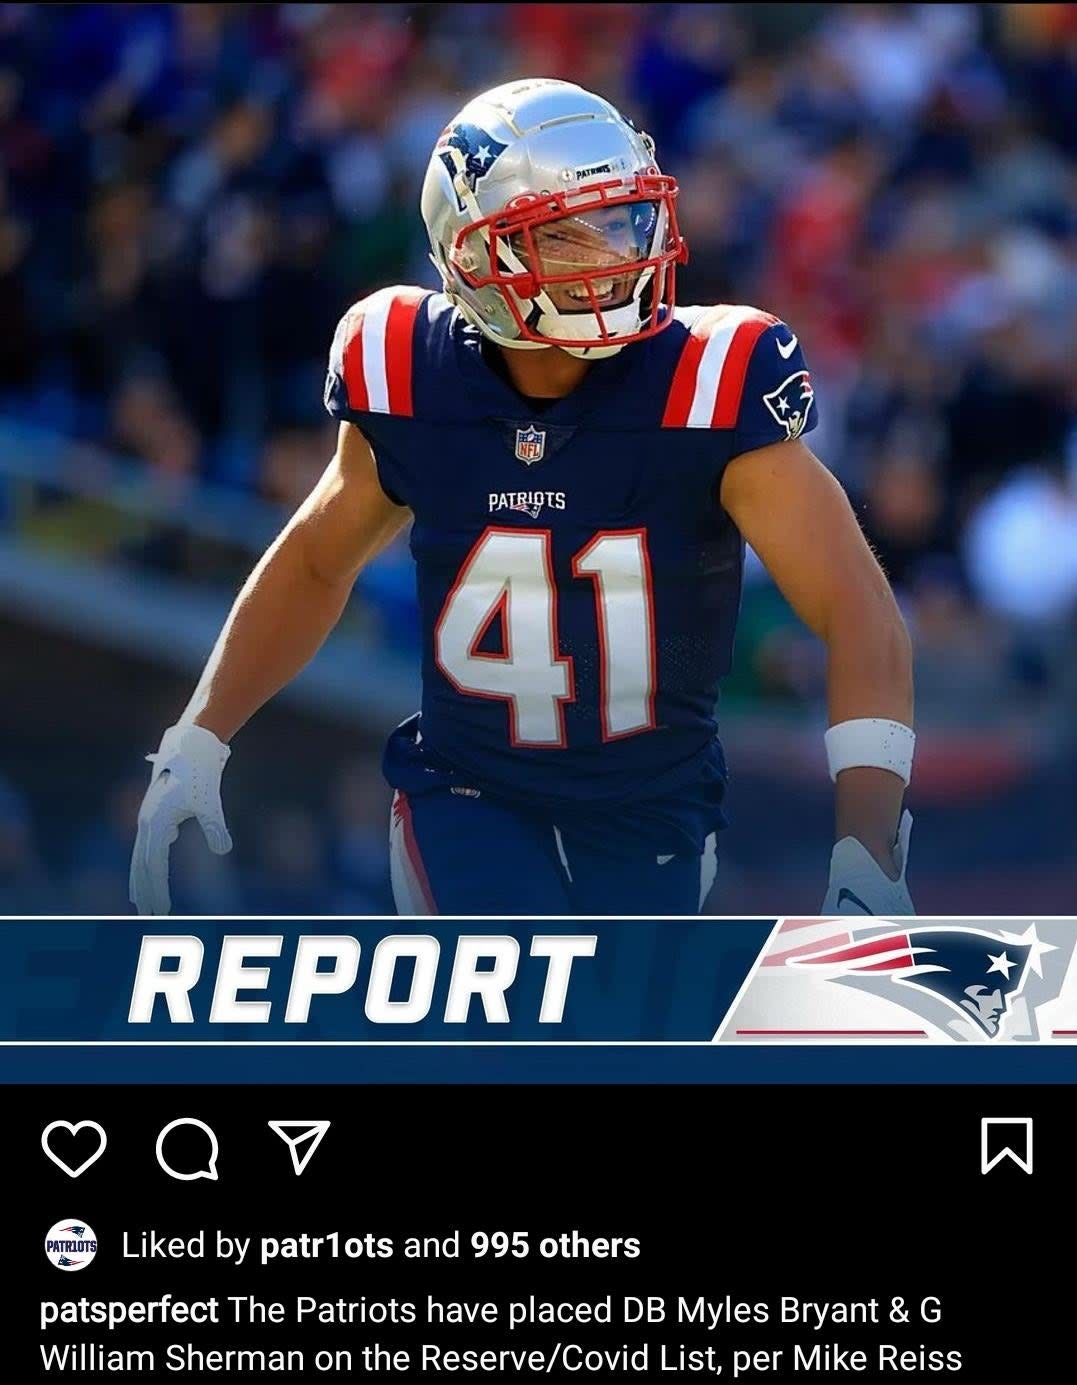 [Patsperfect on IG] The Patriots have placed Myles Bryant and William Sherman on the Reserve/Covid list